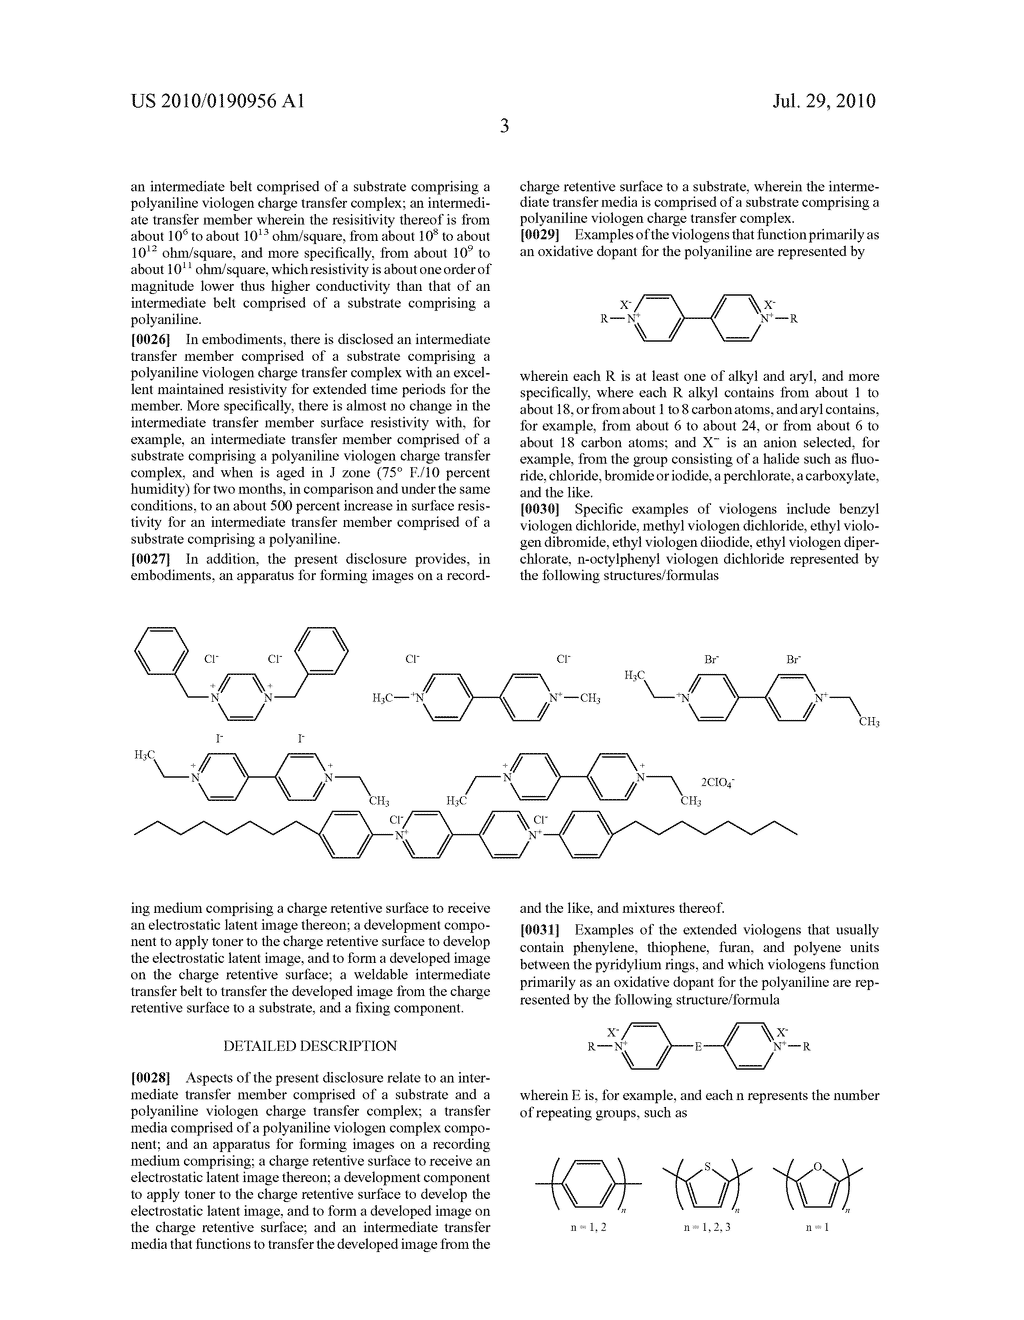 POLYANILINE VIOLOGEN CHARGE TRANSFER COMPLEXES CONTAINING INTERMEDIATE TRANSFER MEMBERS - diagram, schematic, and image 04